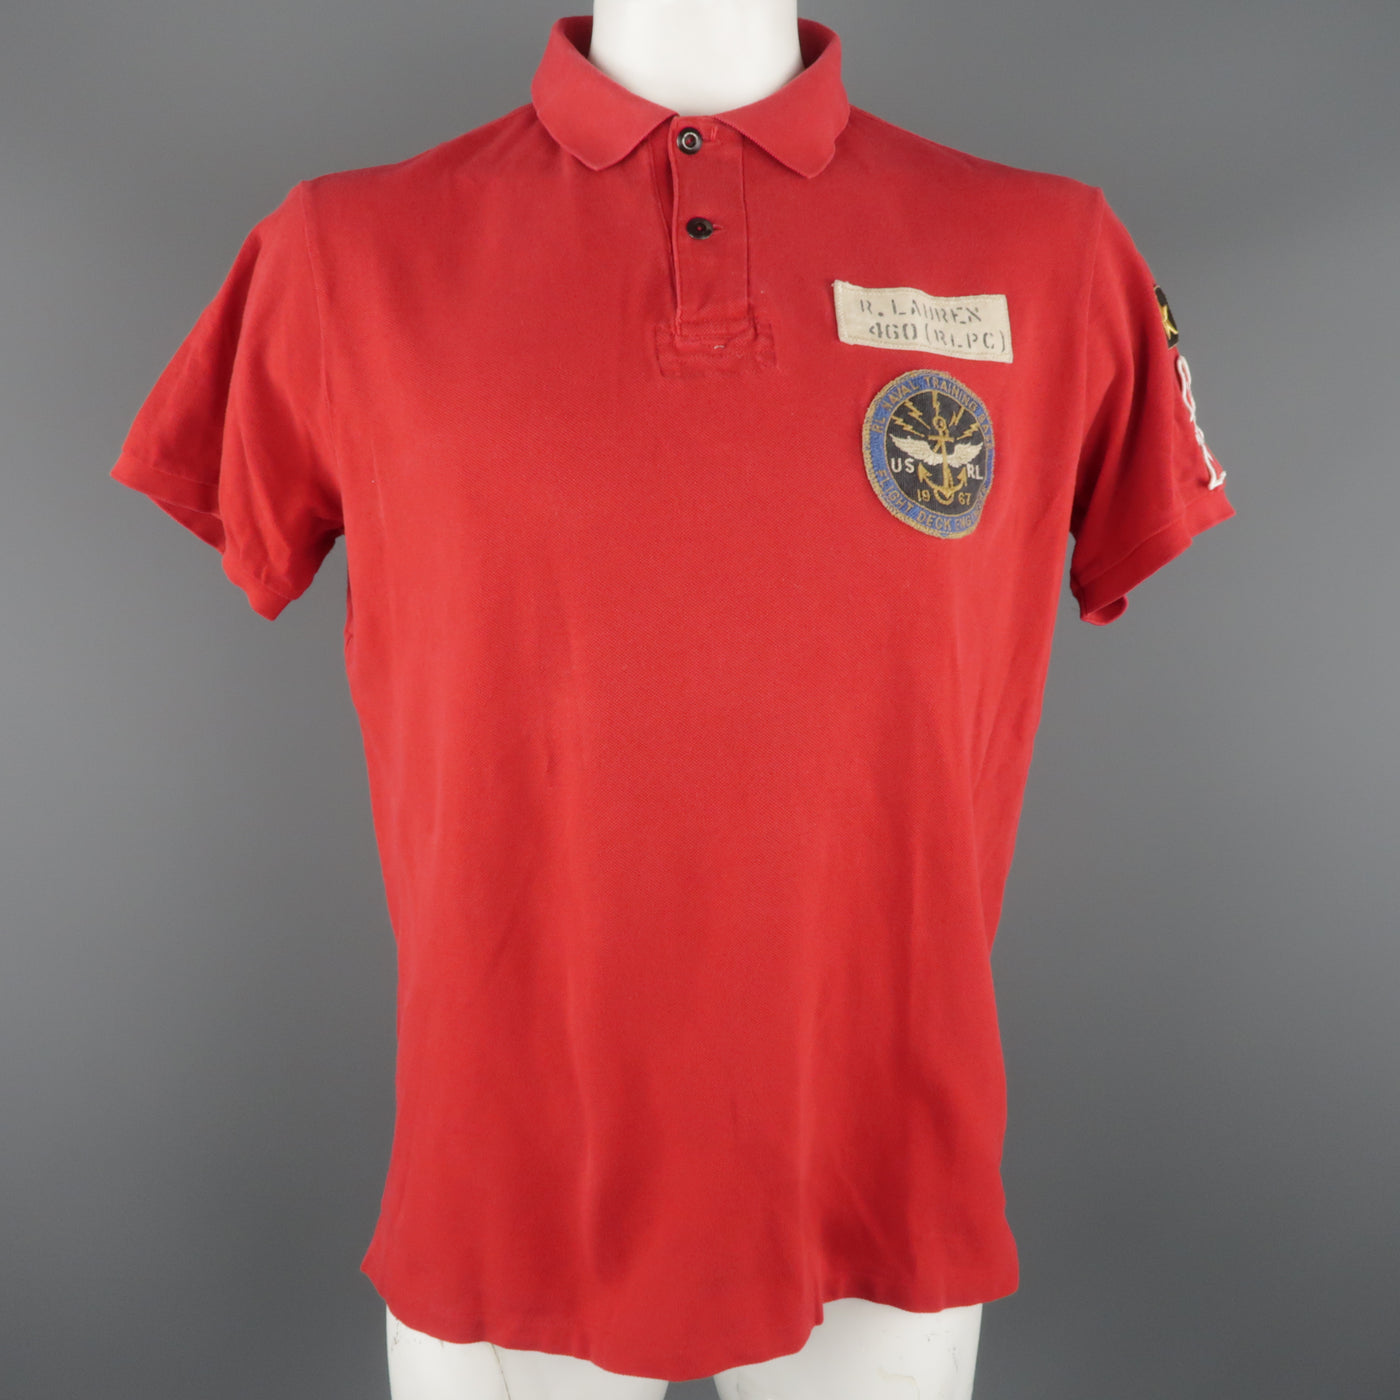 RALPH LAUREN Size XL Red Solid Cotton Buttoned POLO Shirt